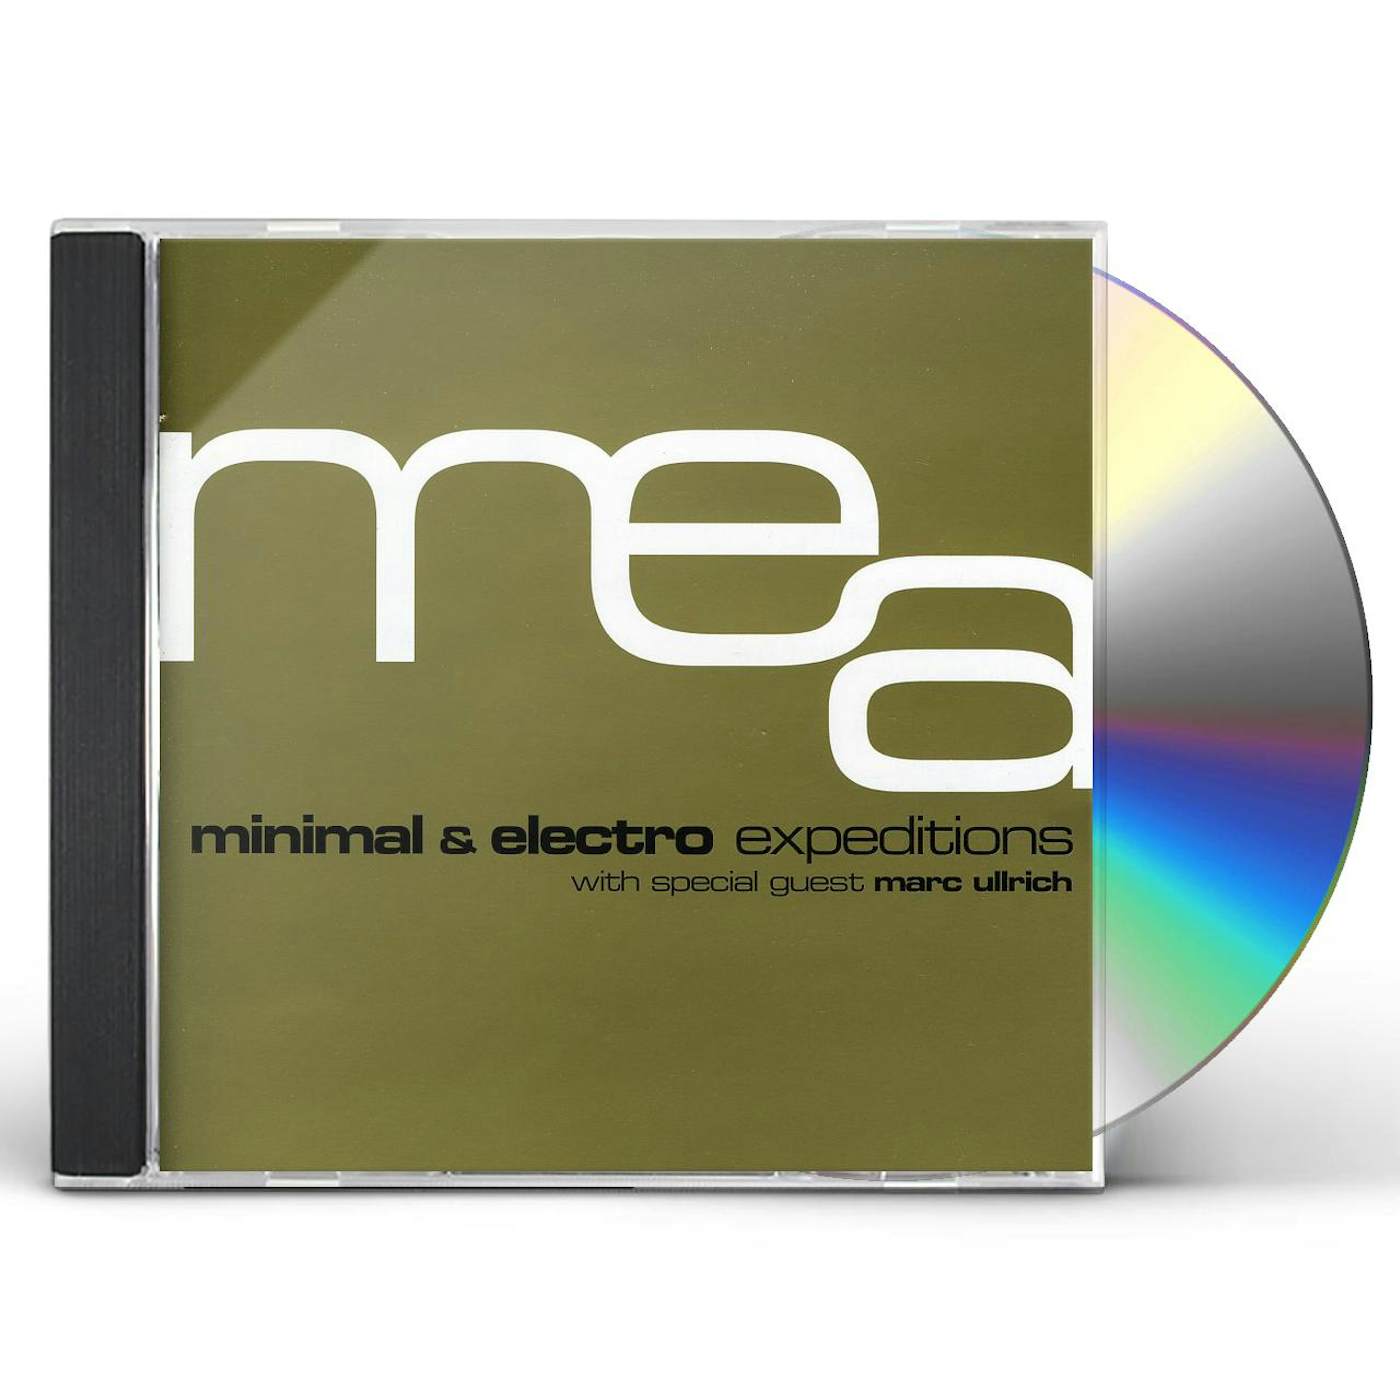 Mea MINIMAL & ELECTRO EXPEDITIONS CD